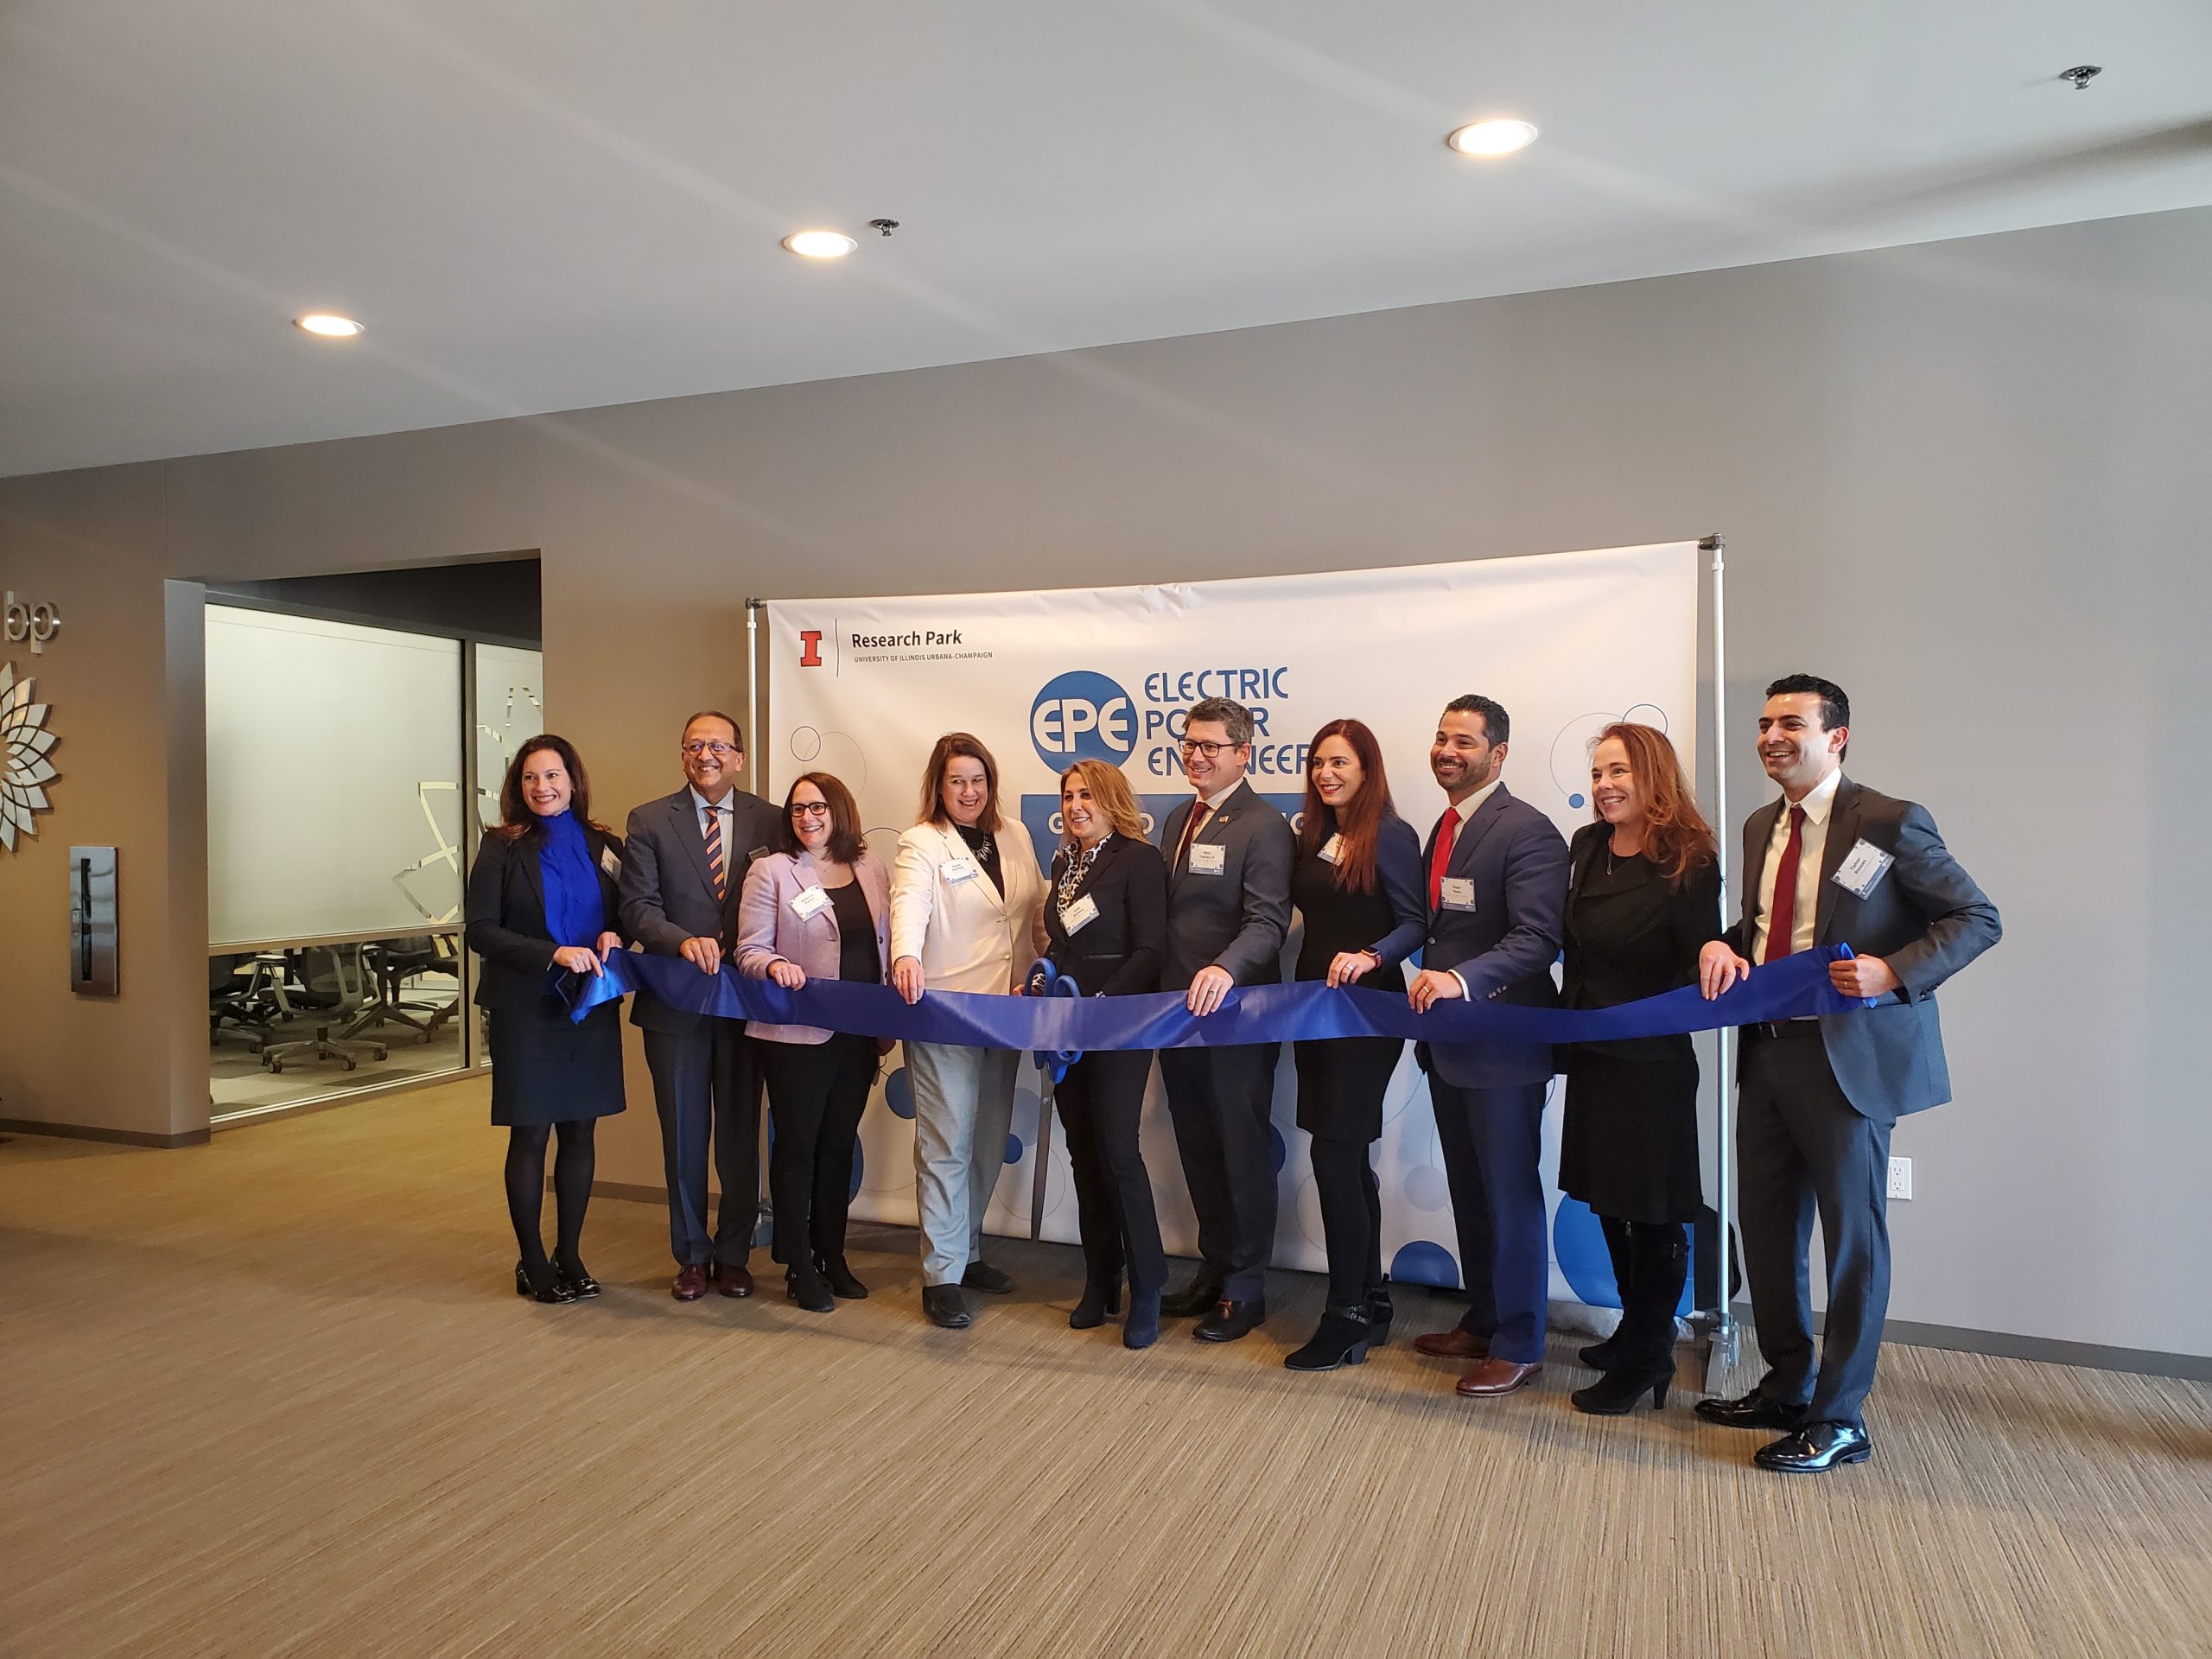 EPE employees cutting the ceremonial ribbon at the EPE Grand Opening.